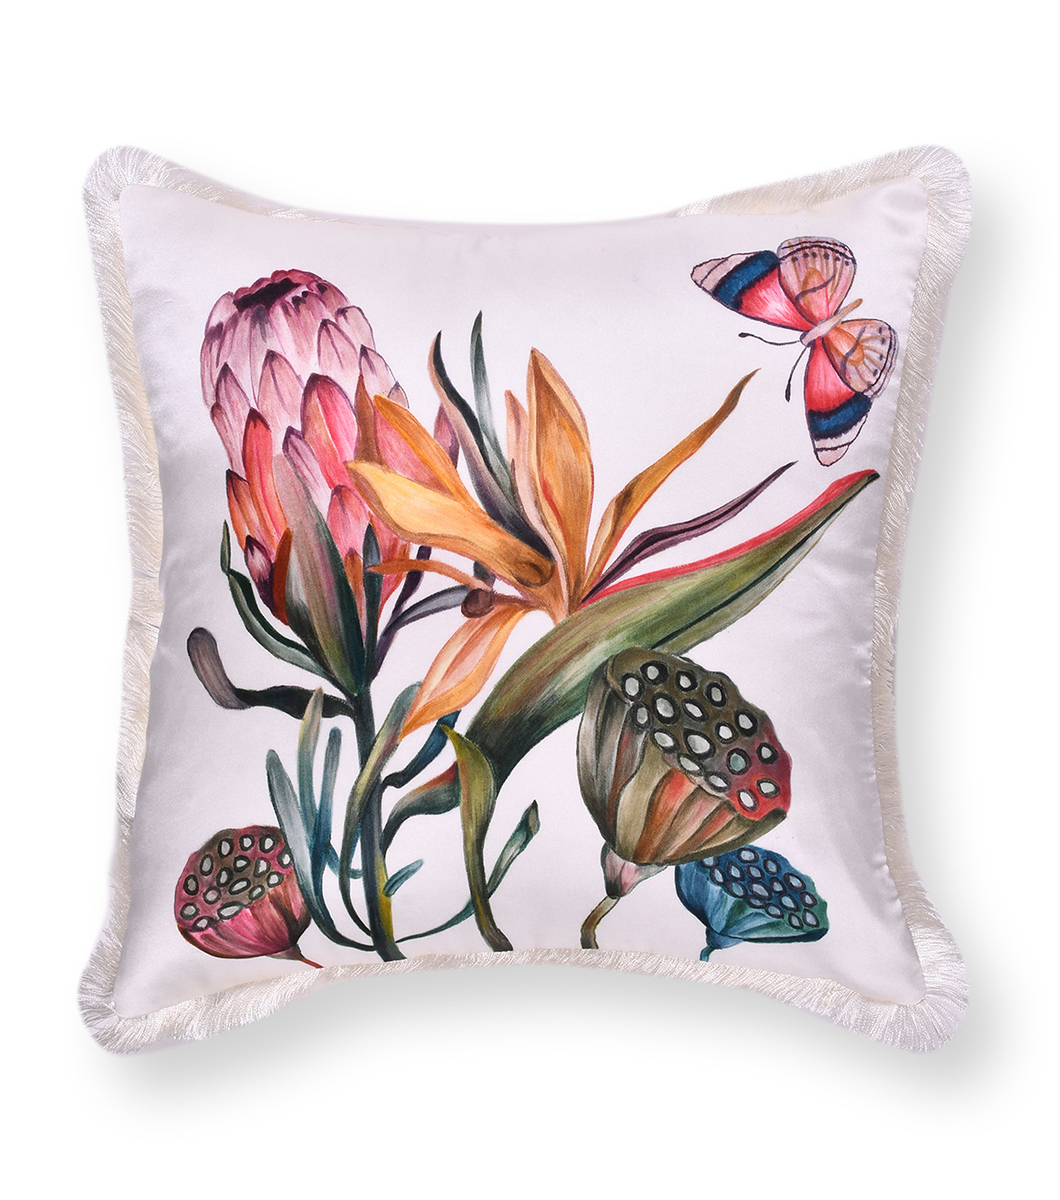 English Countryside cushion cover